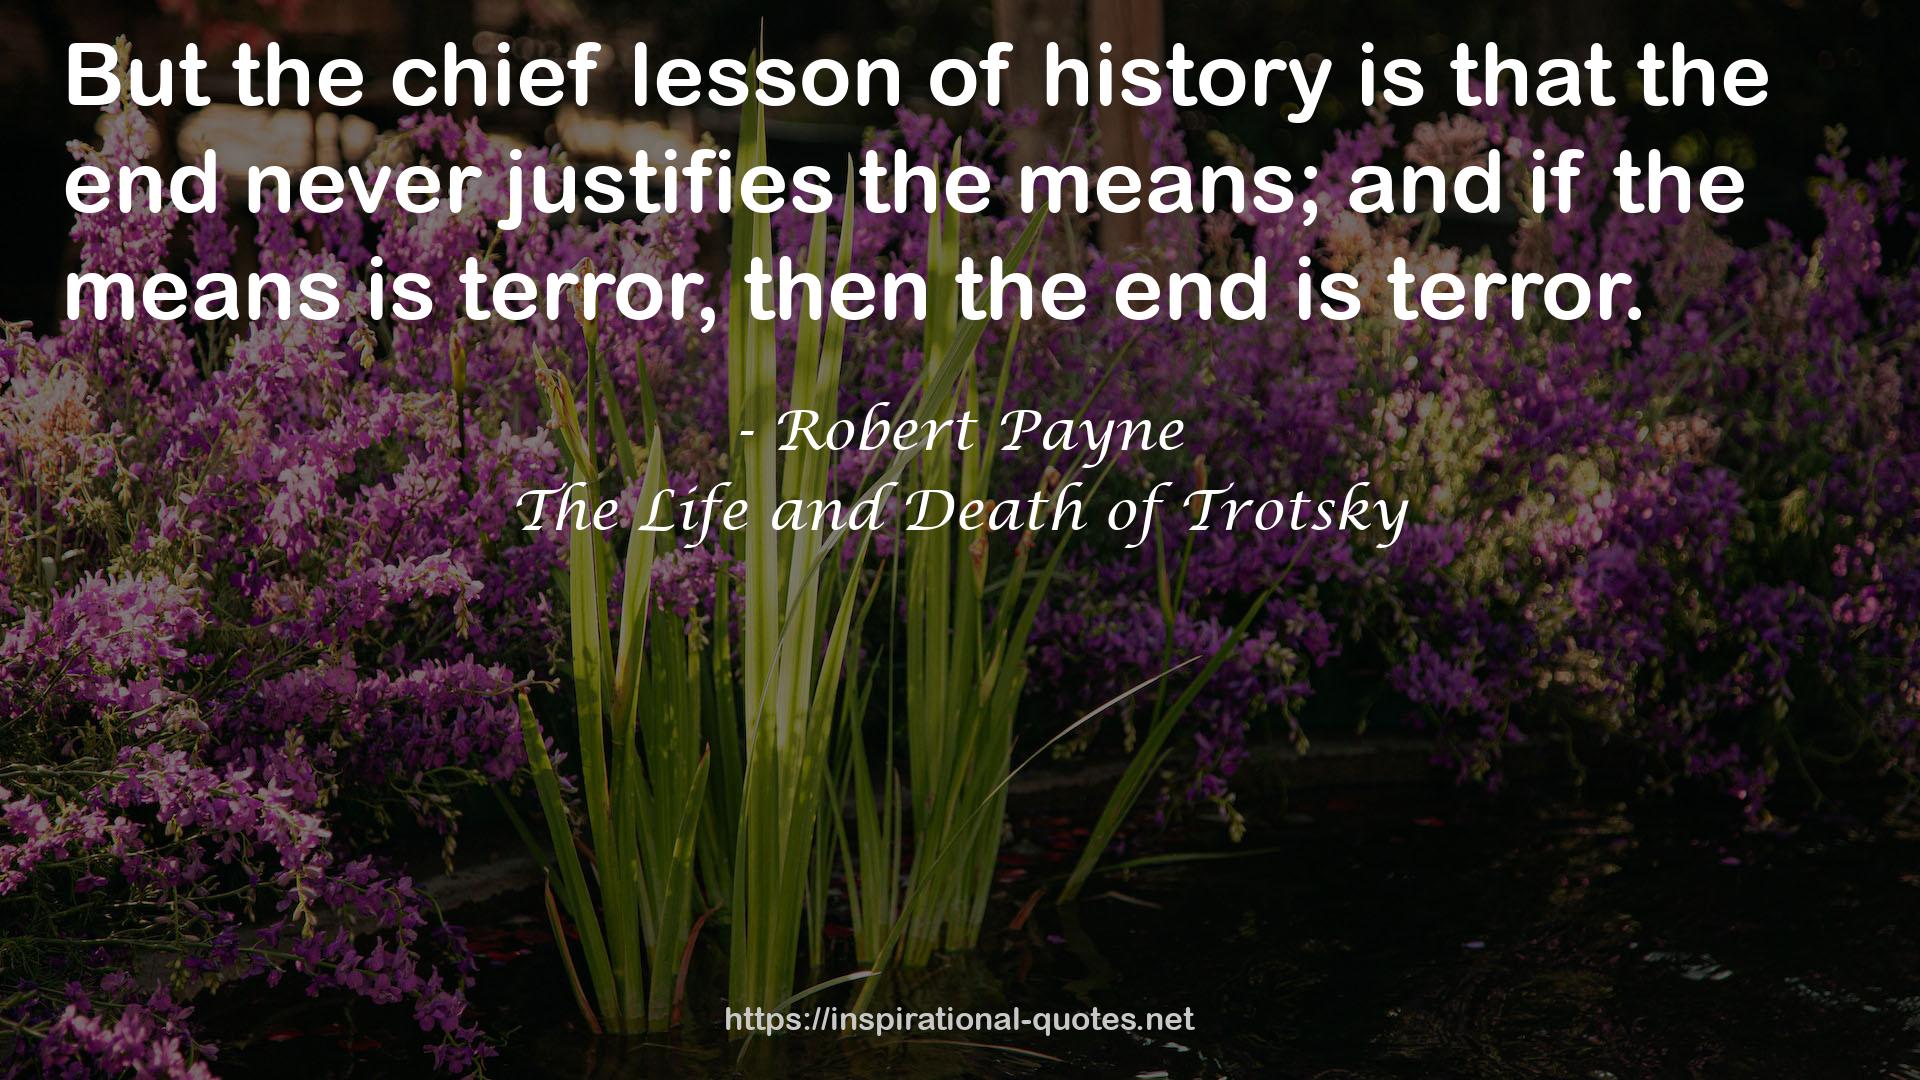 The Life and Death of Trotsky QUOTES